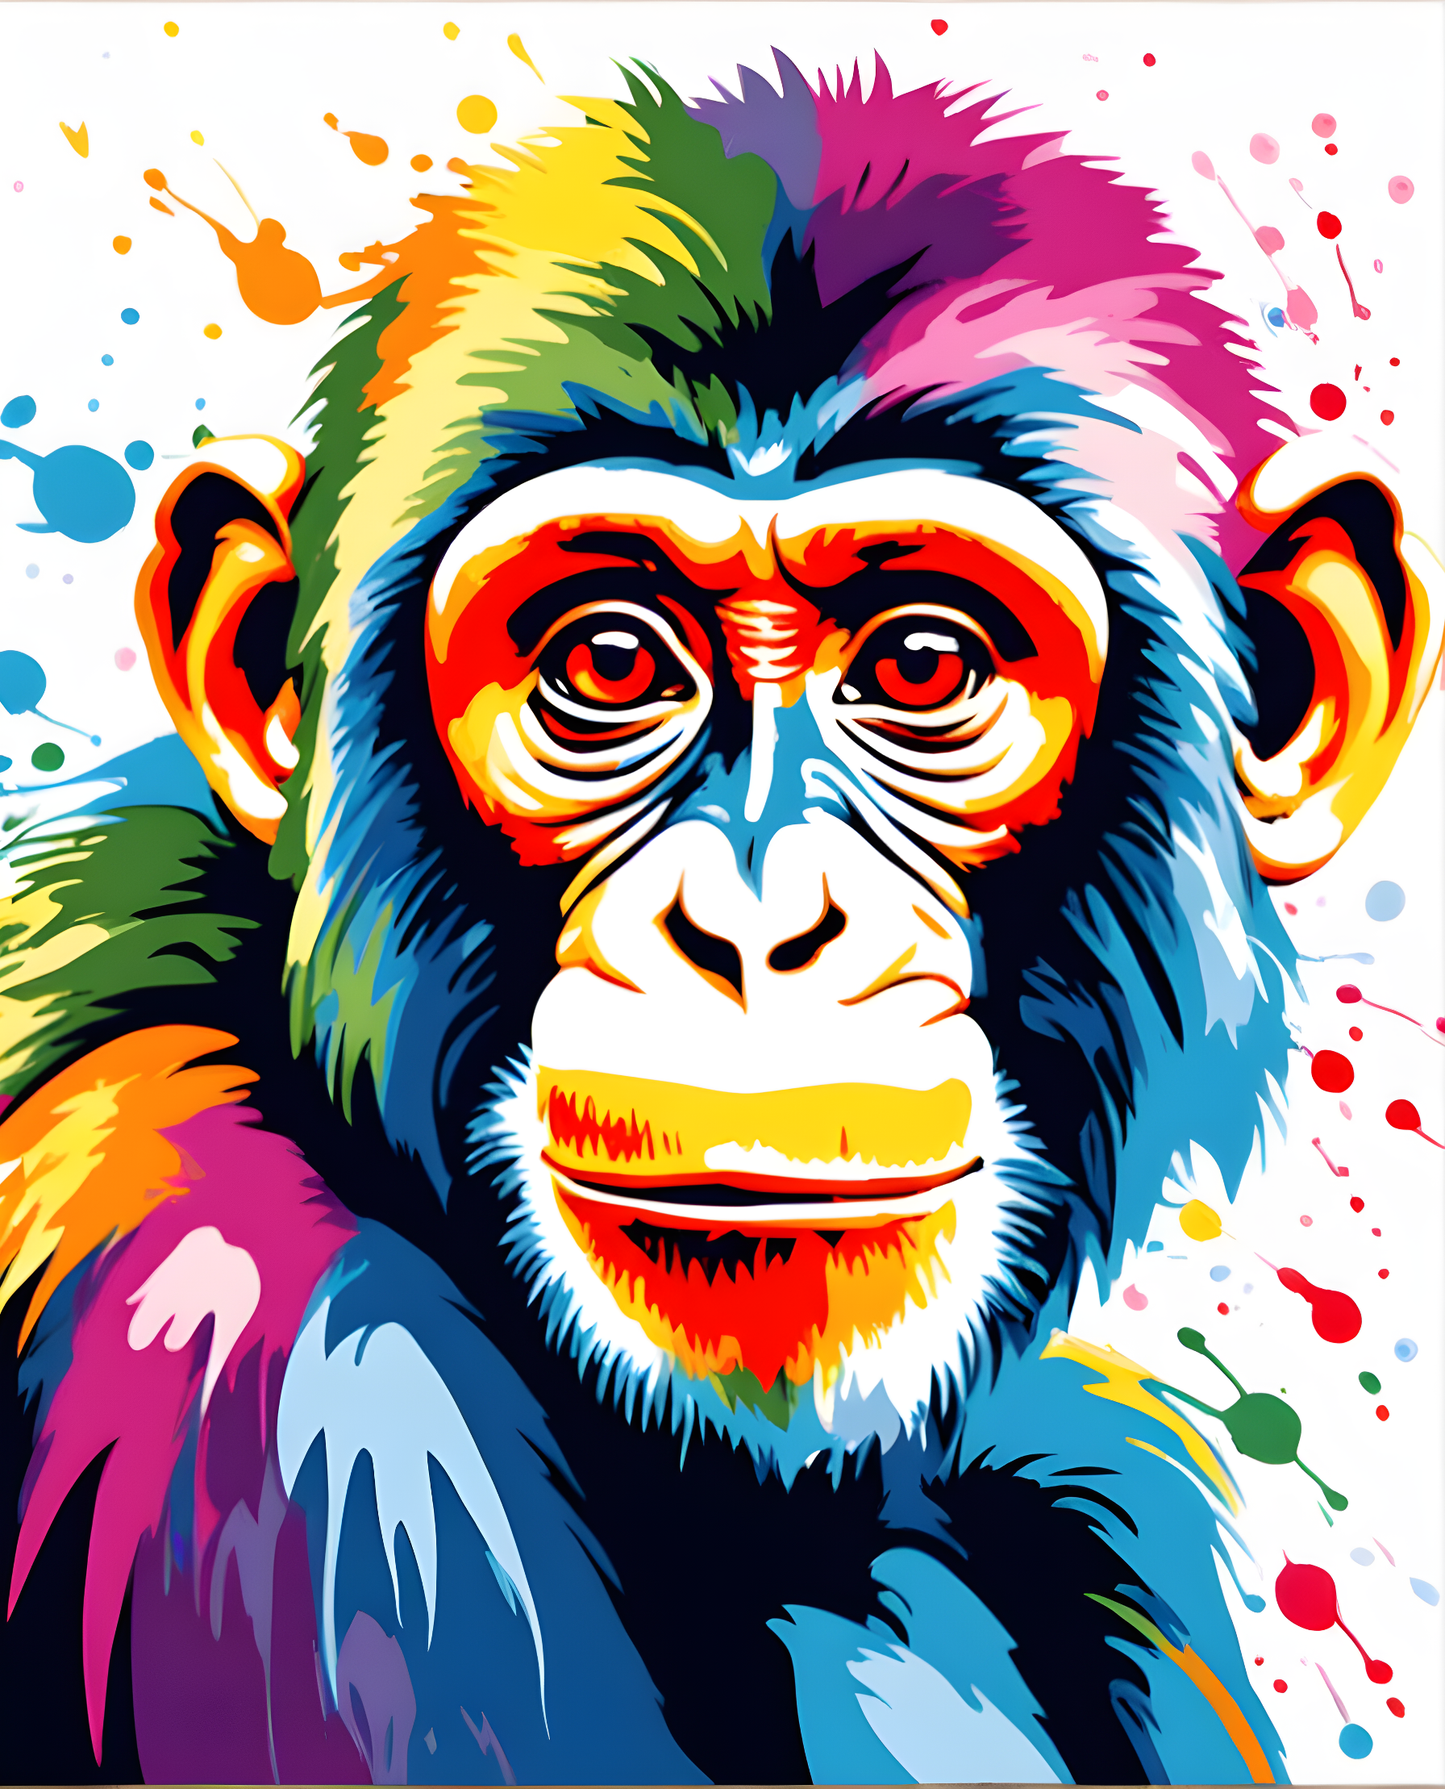 Colorful Monkey (1) - Van-Go Paint-By-Number Kit